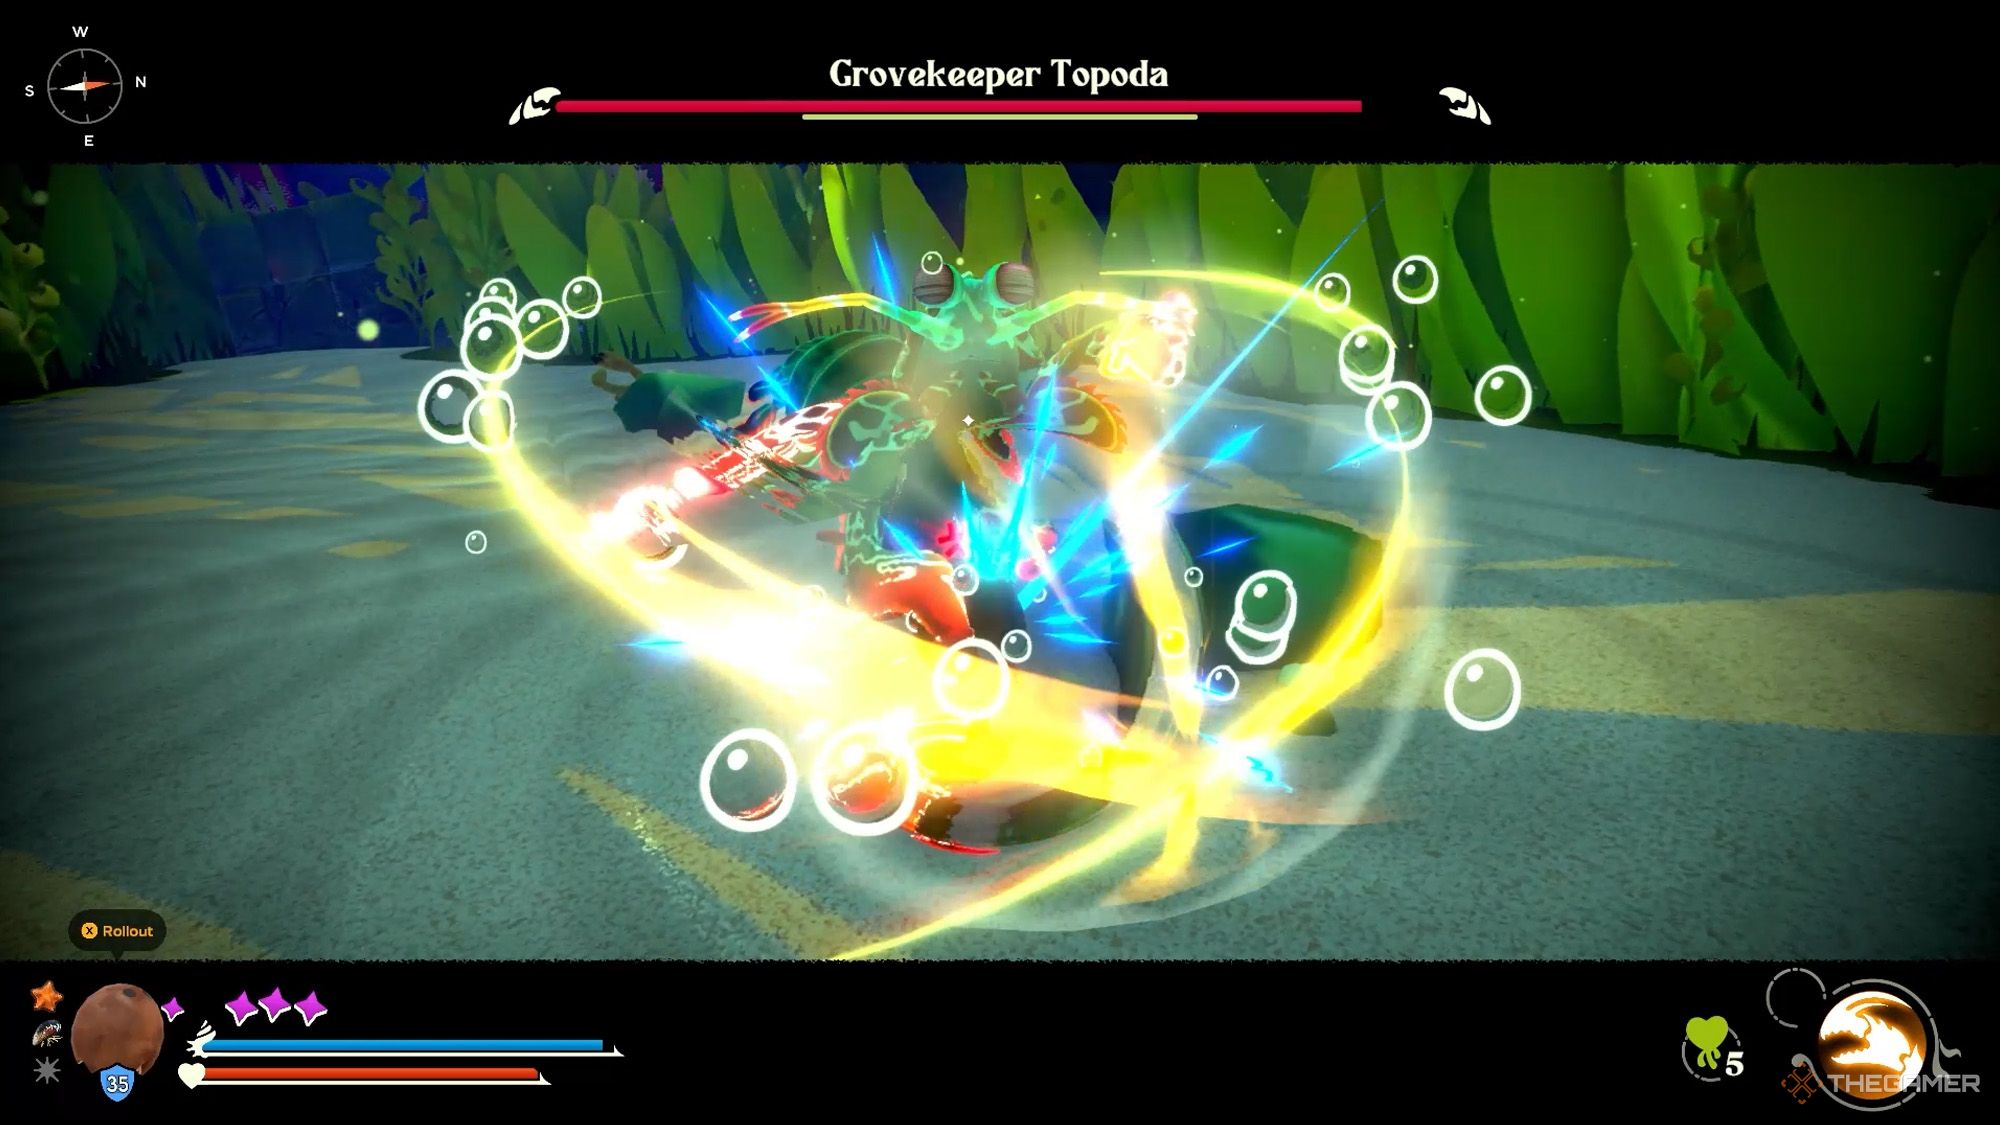 Another Crab's Treasure - Grovekeeper Topoda using blistering punches against Kril